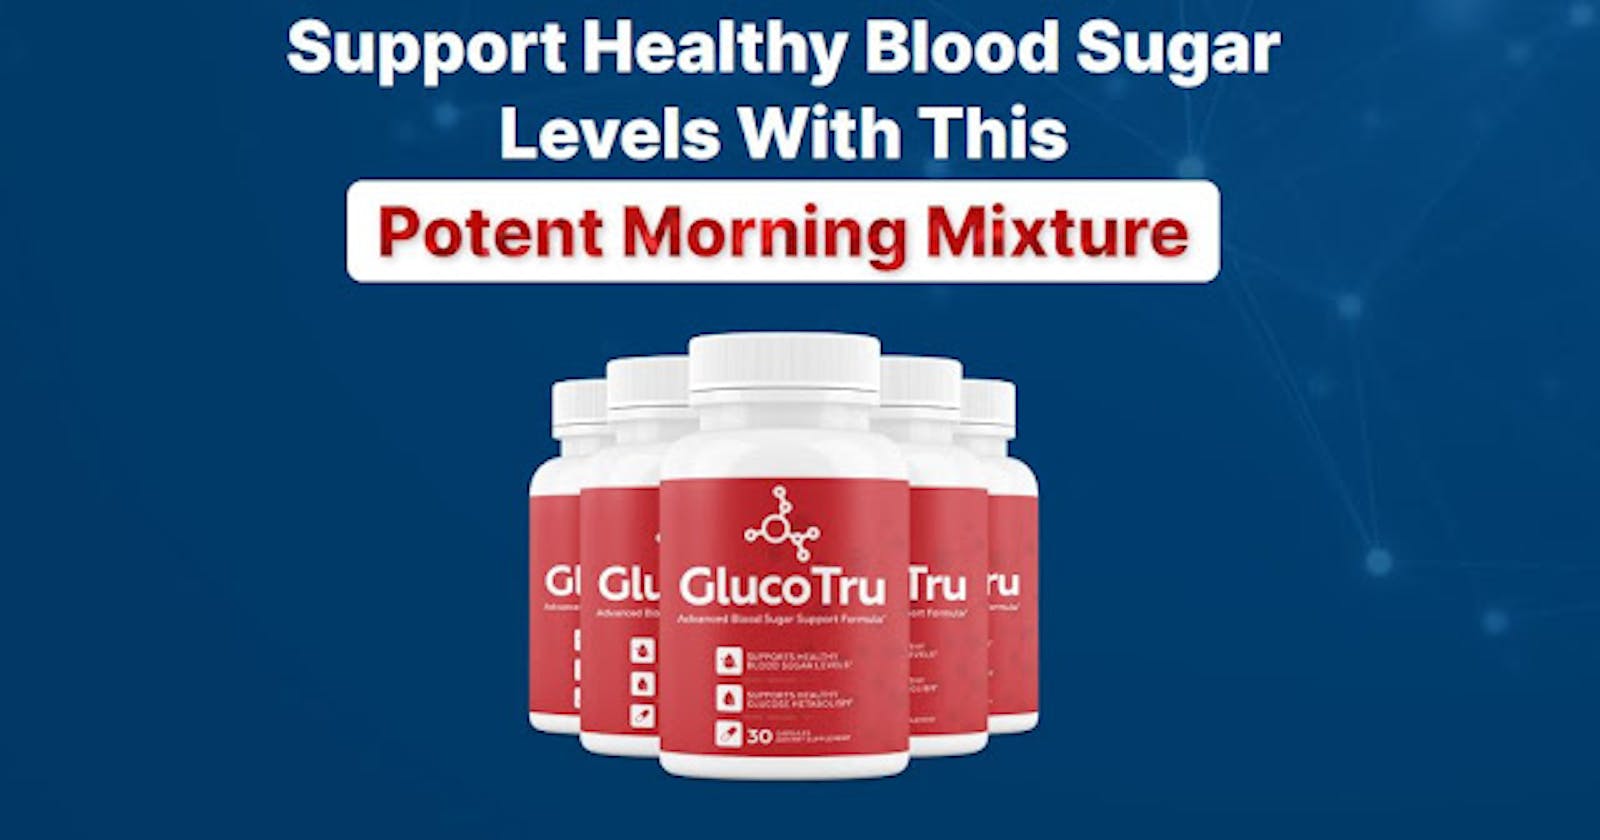 Glucotru - Blood Sugar Supplement, Price, Uses And  Results?